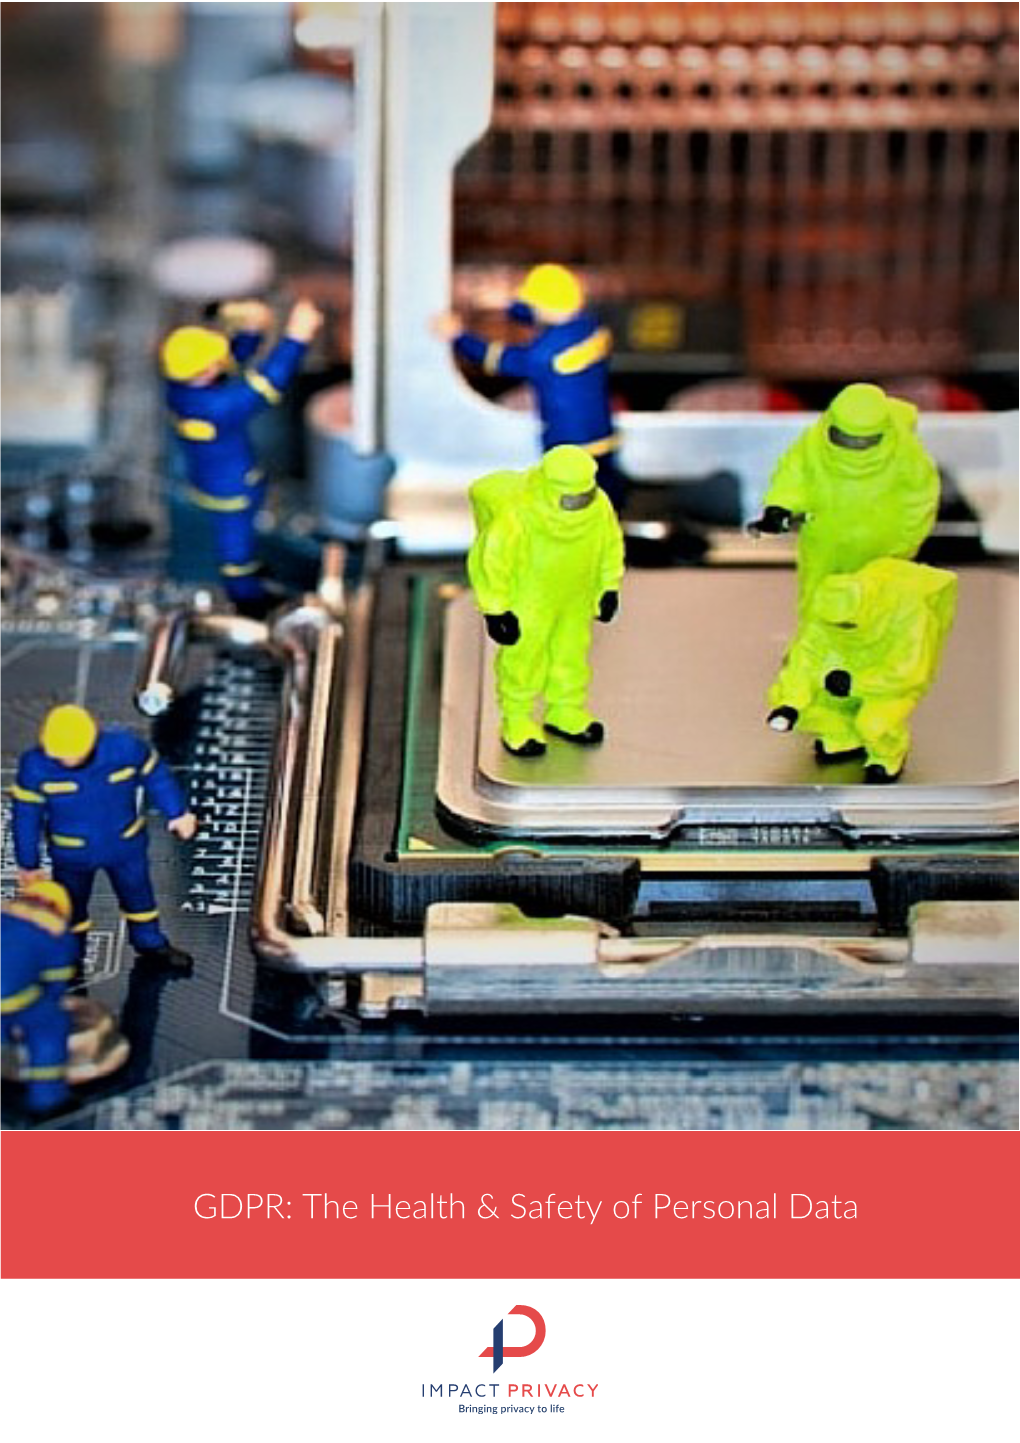 GDPR: the Health & Safety of Personal Data